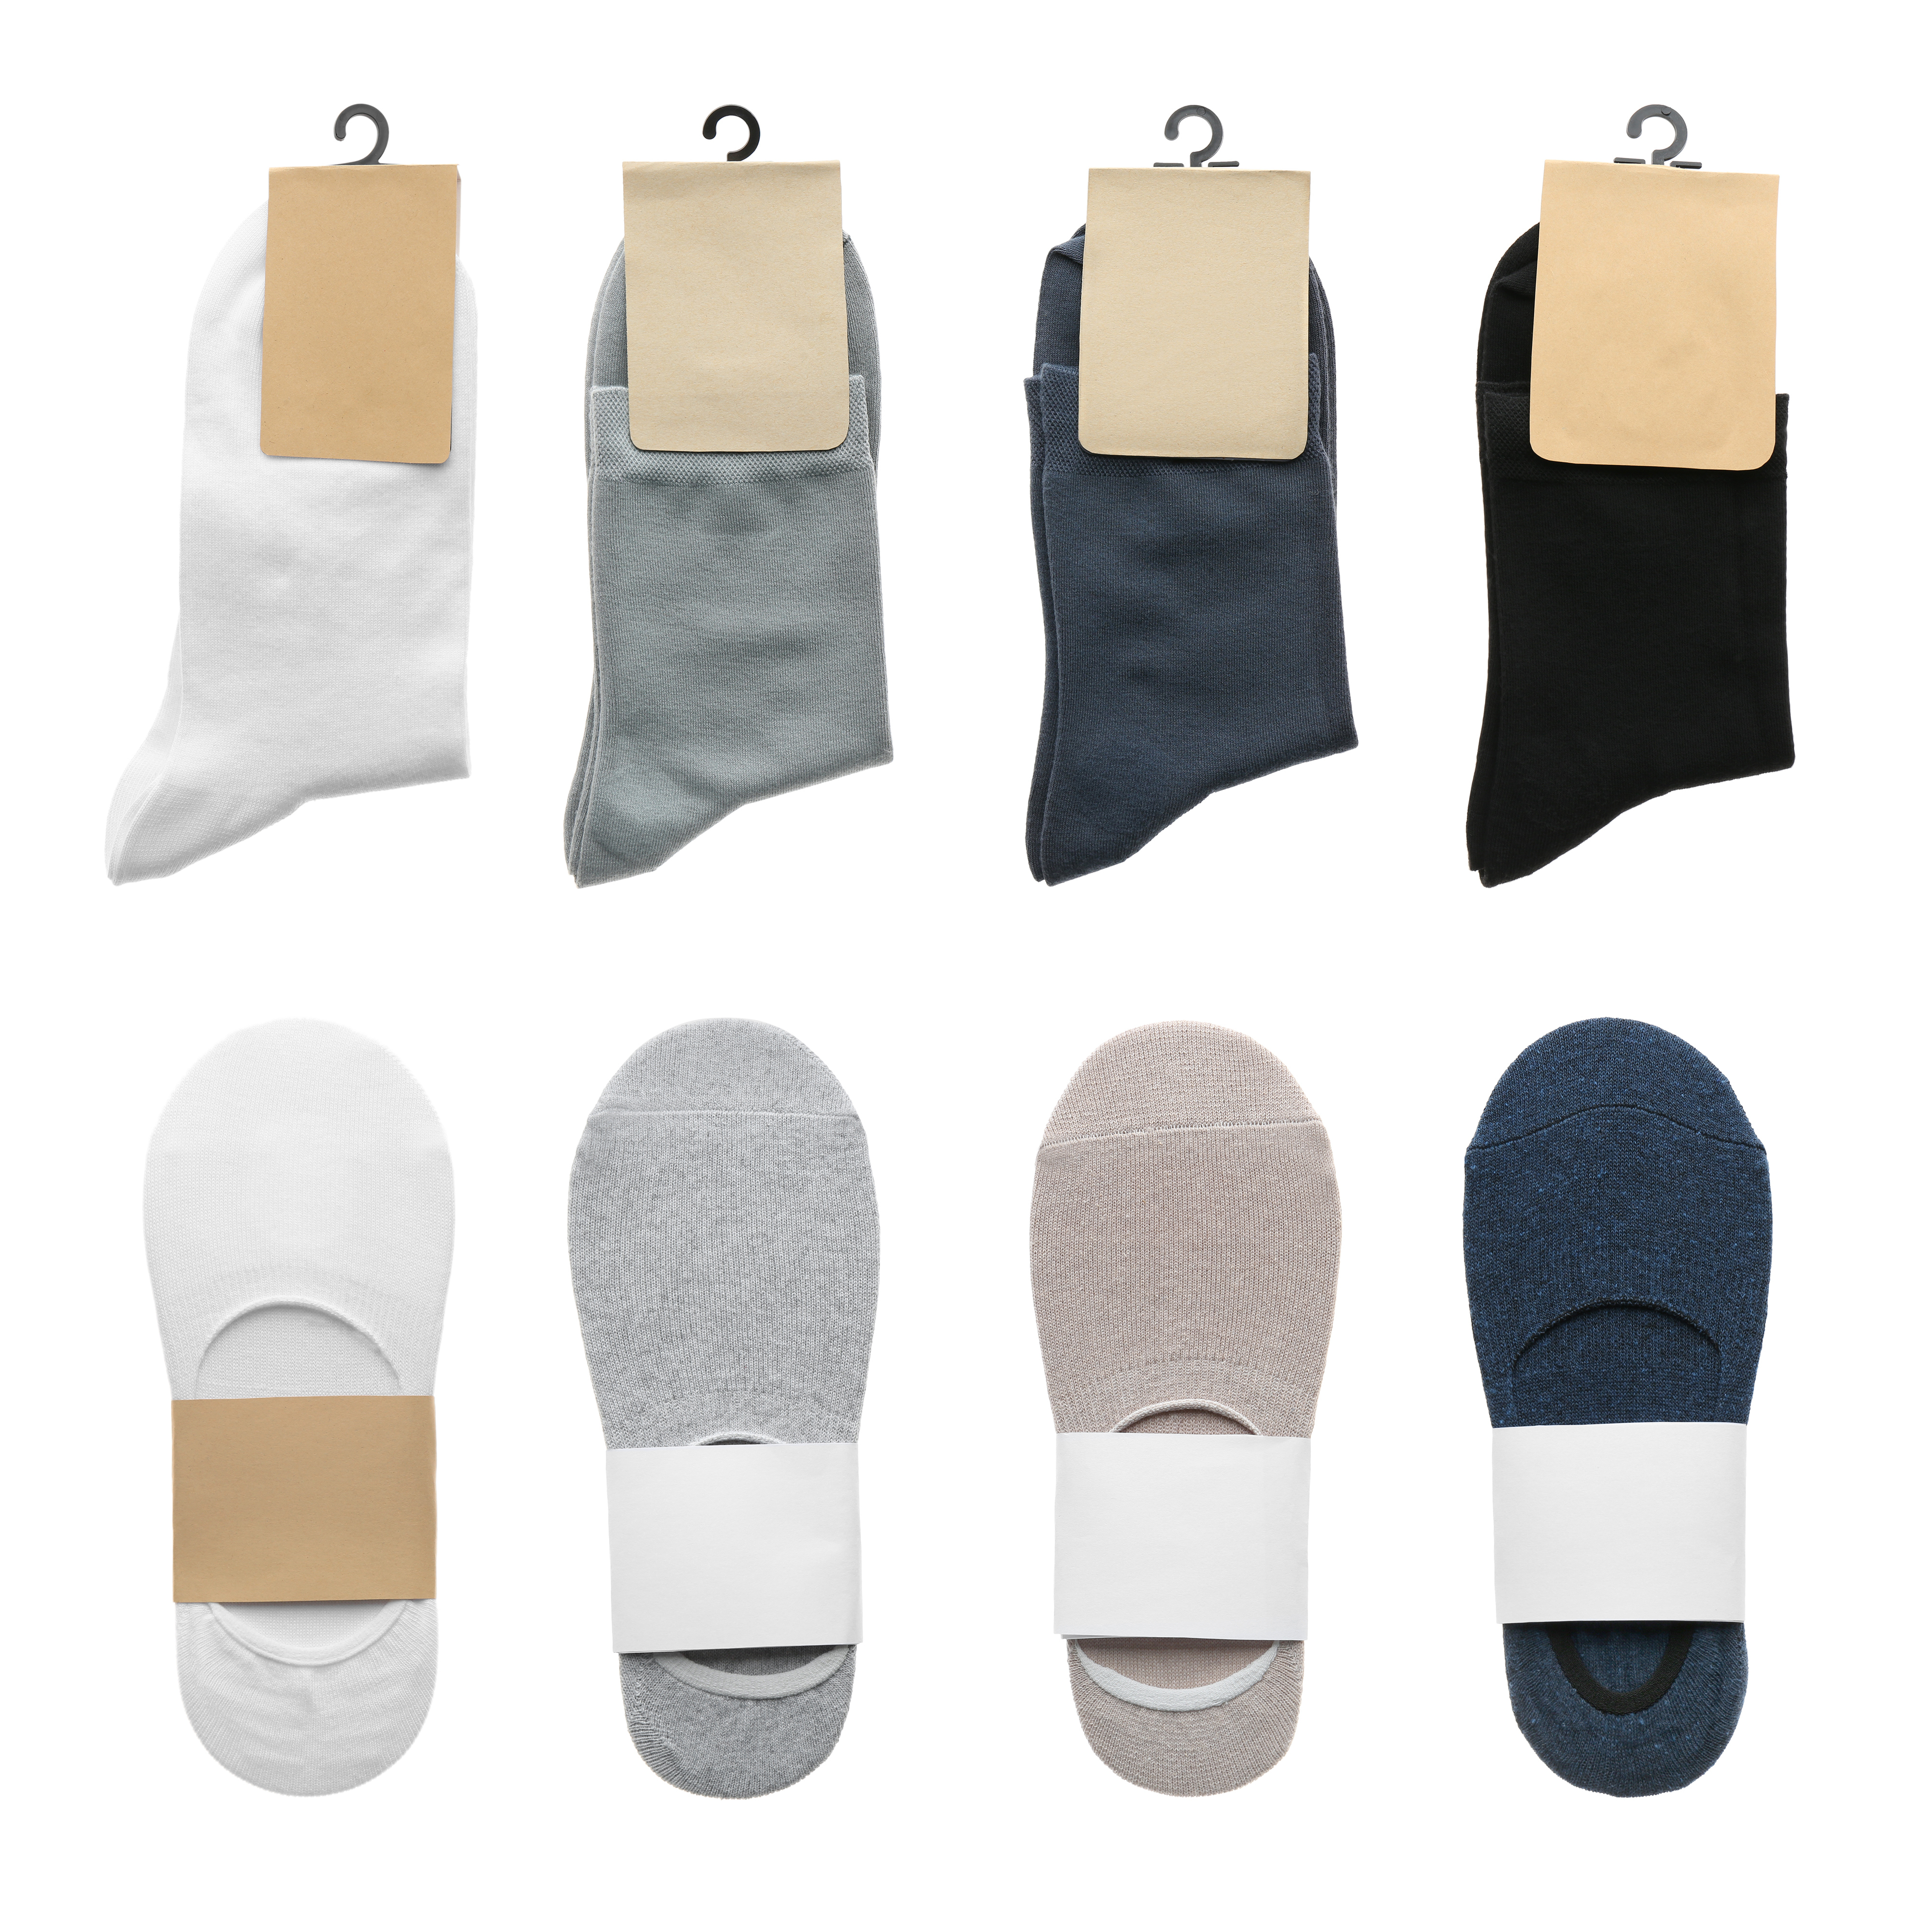 Eight no-show socks in various shades displayed with and without packaging